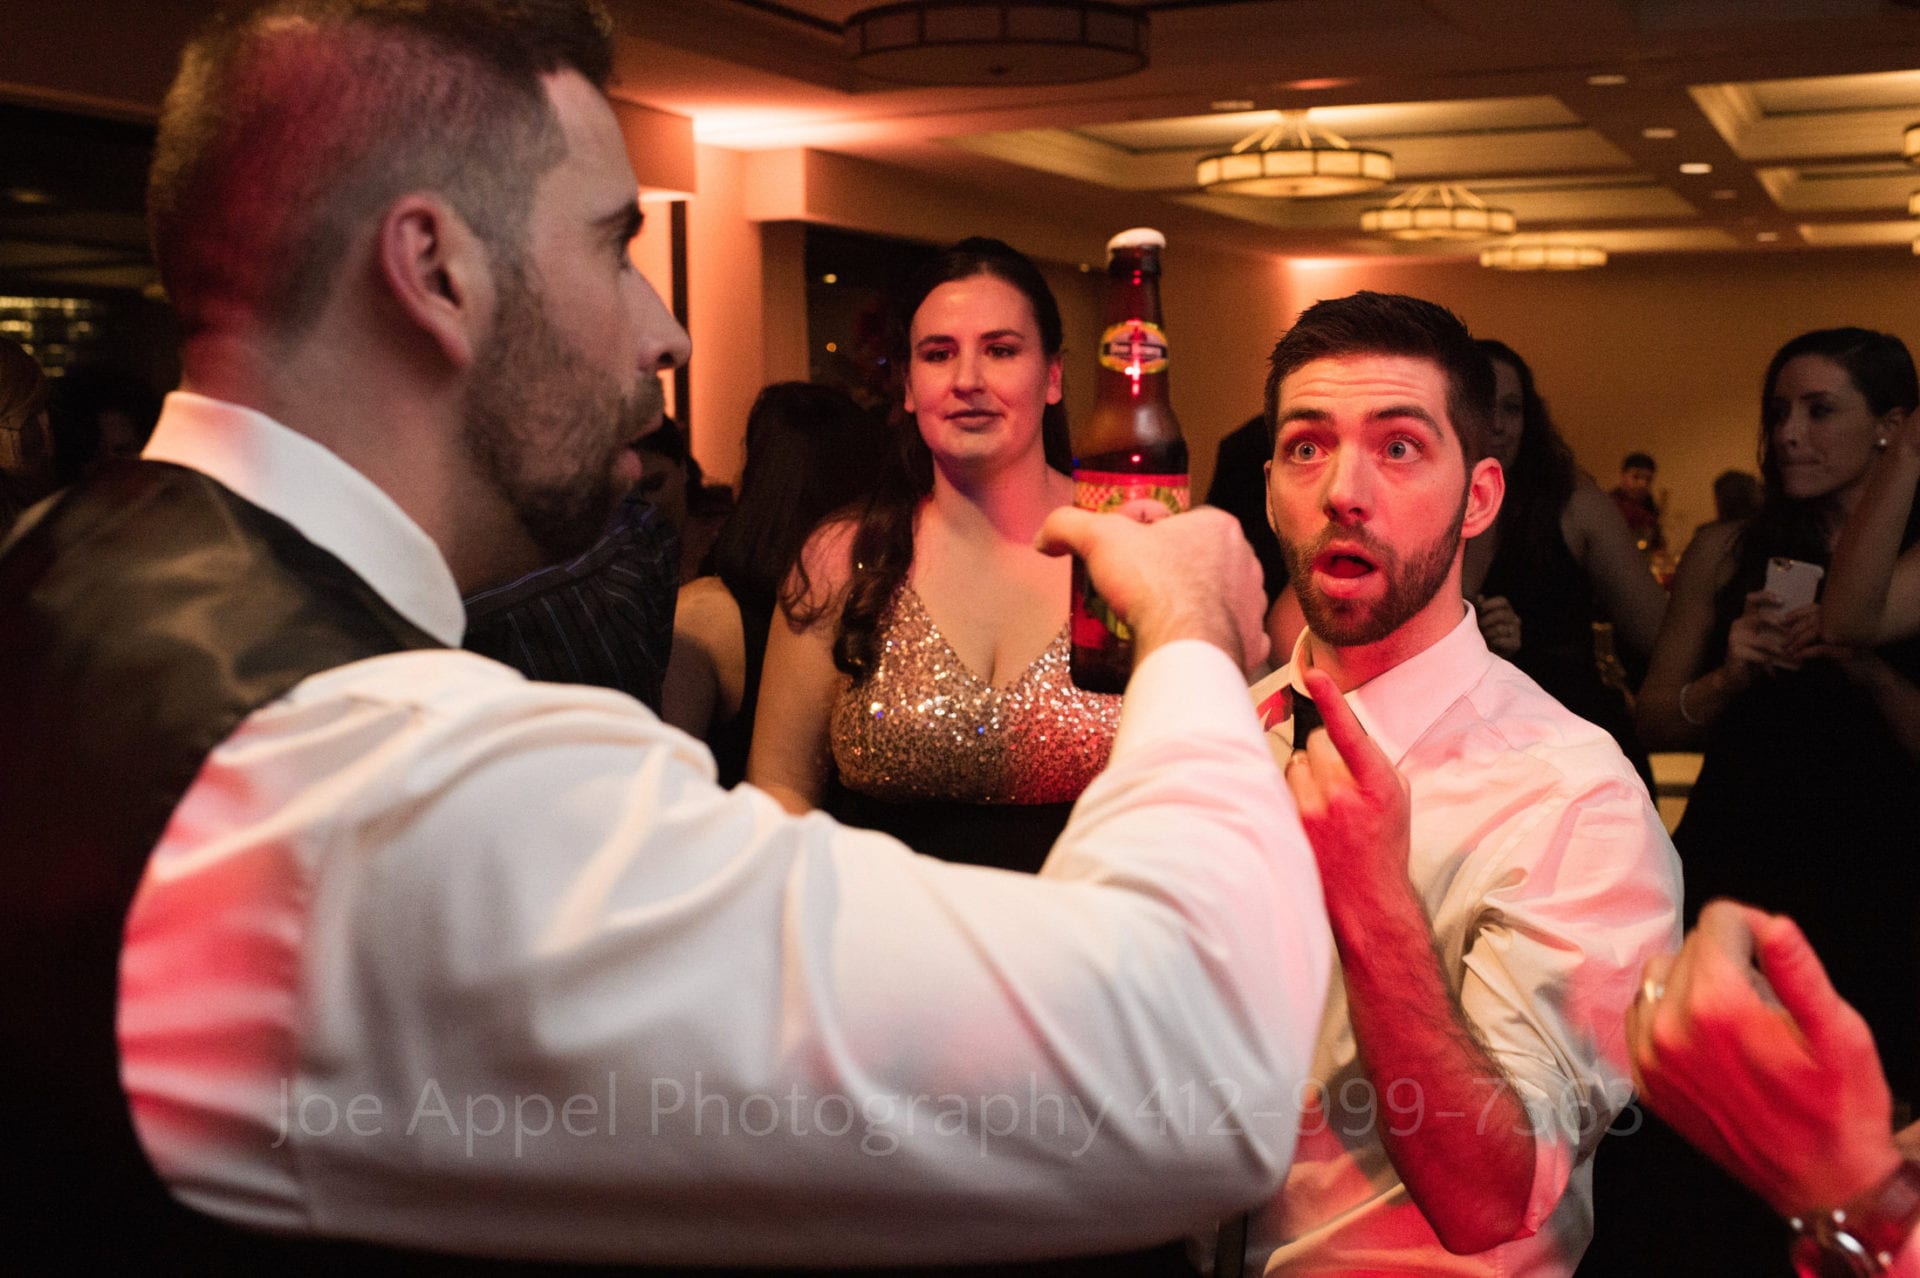 A beer foams over in a grooms hand while a guest with a surprised look on his face points at it.